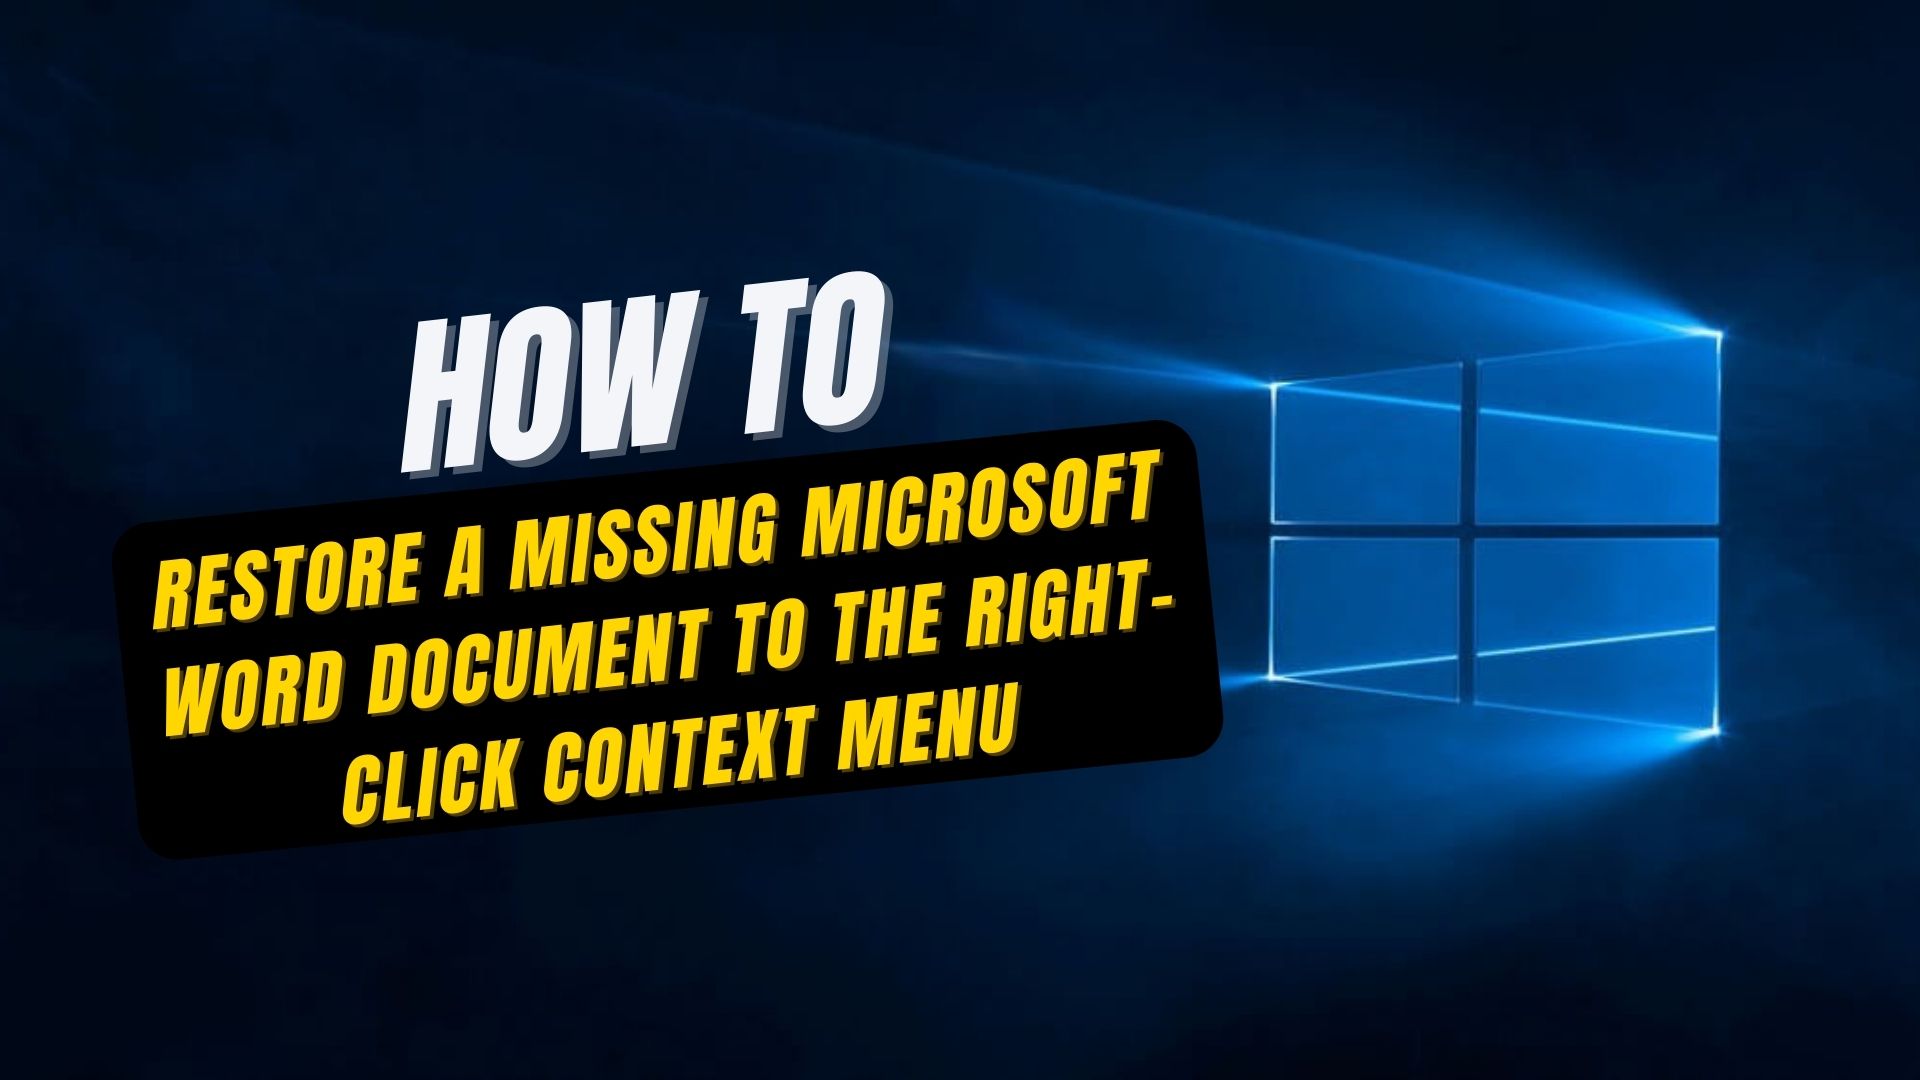 Restore a Missing Microsoft Word Document to the Right-click Context Menu